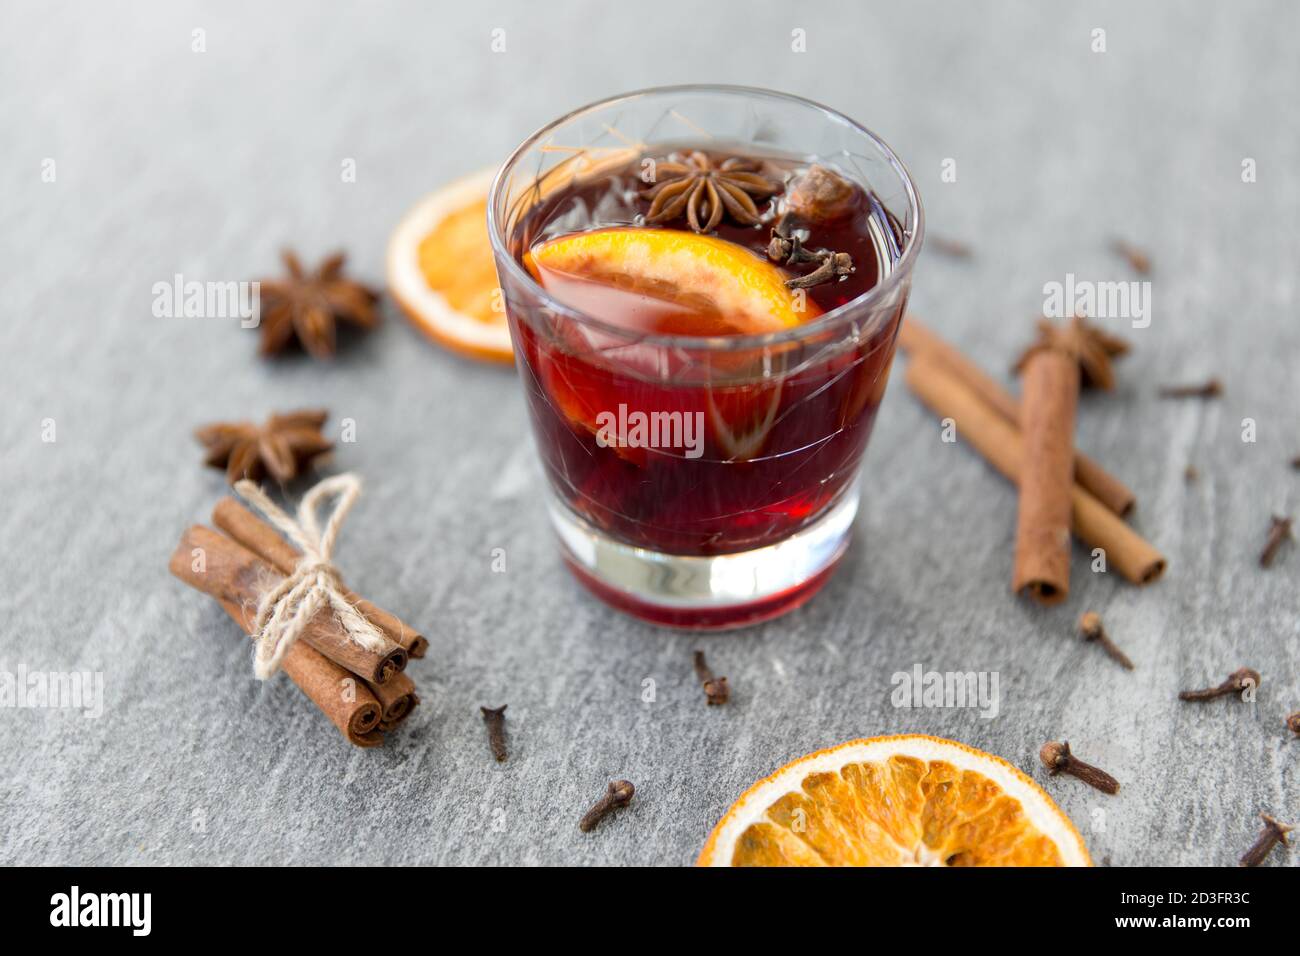 hot mulled wine, orange slices, raisins and spices Stock Photo